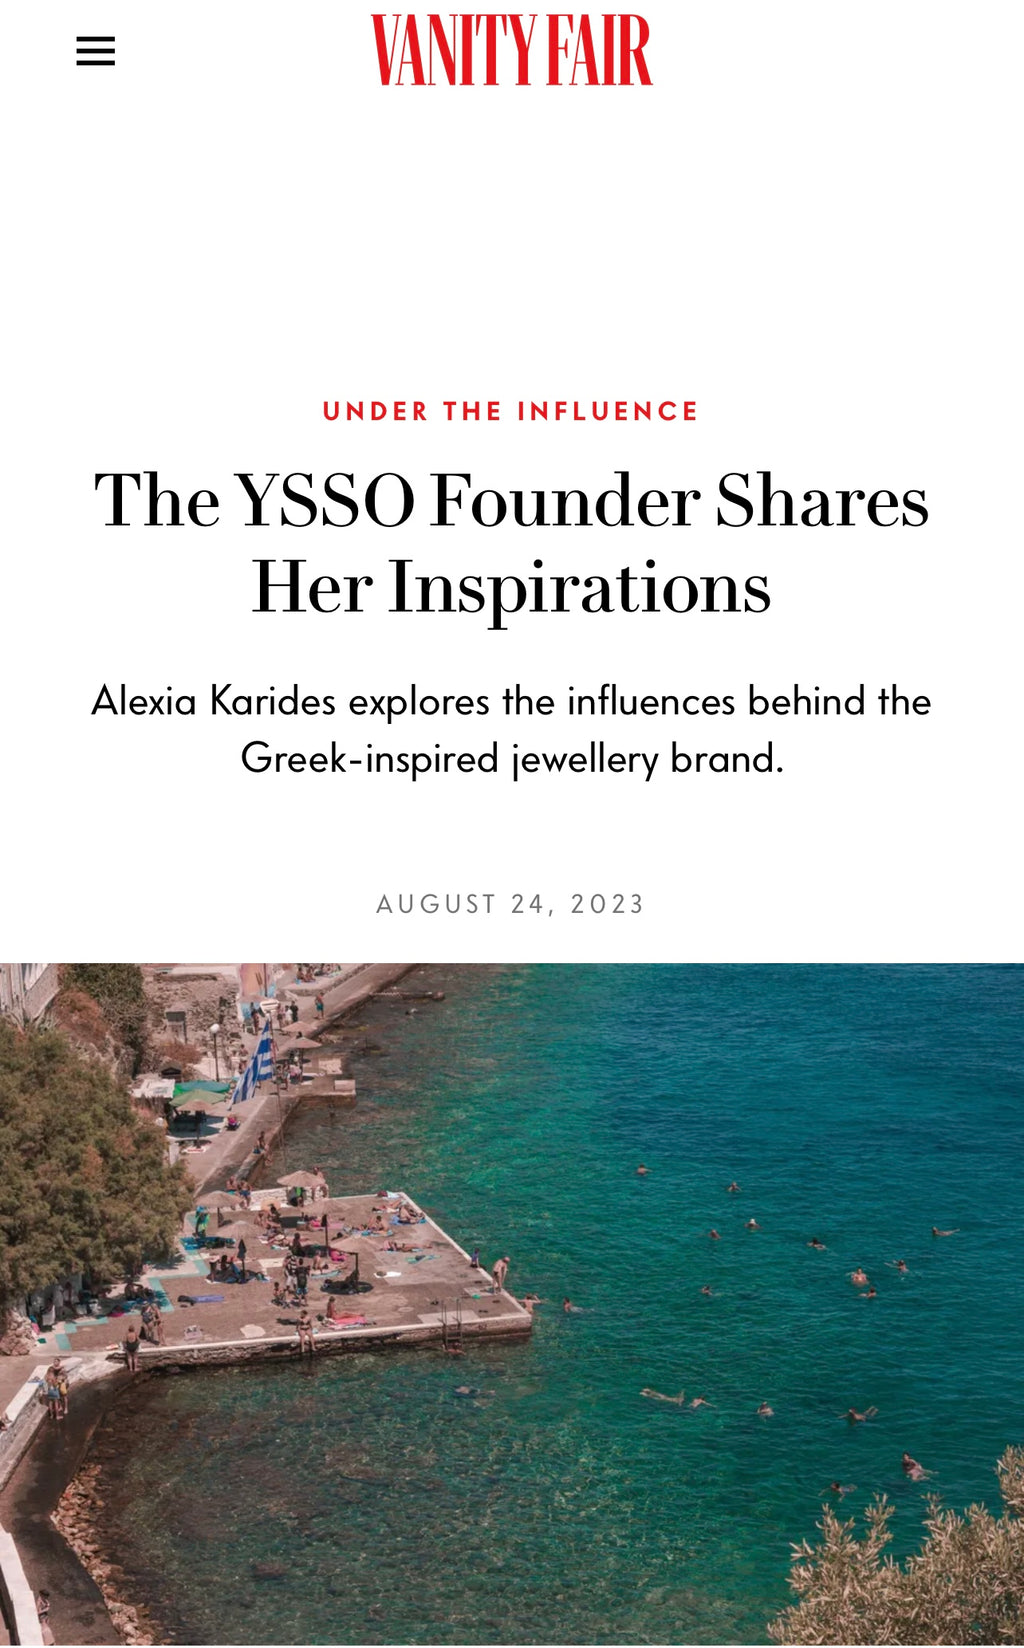 VANITY FAIR: The YSSO Founder Shares Her Inspirations